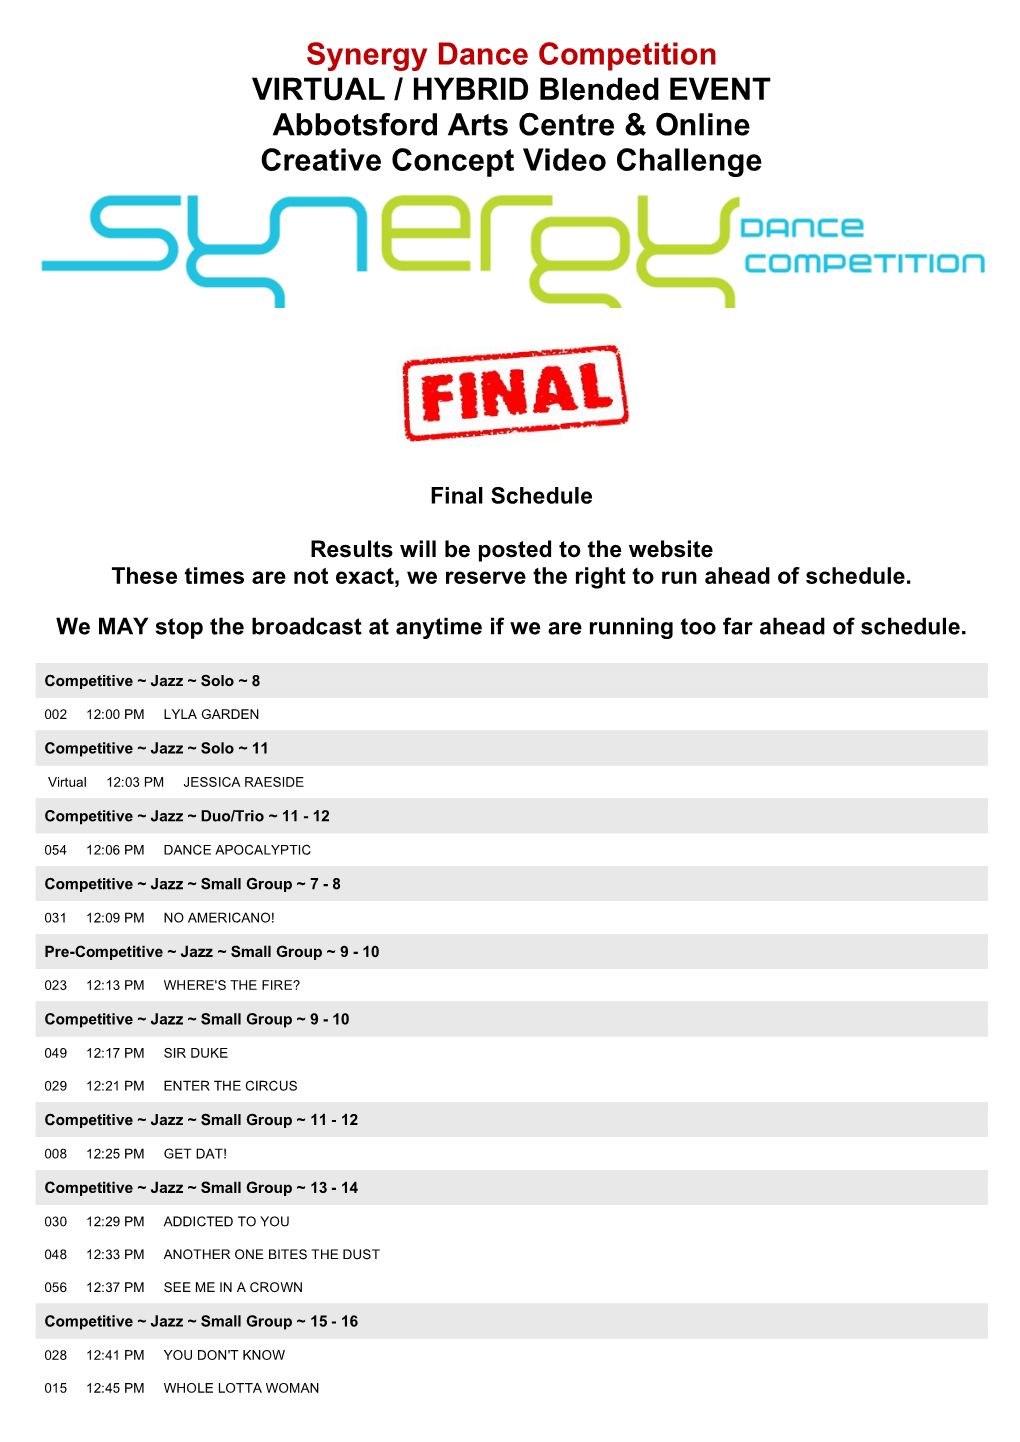 Synergy Dance Competition VIRTUAL / HYBRID Blended EVENT Abbotsford Arts Centre & Online Creative Concept Video Challenge